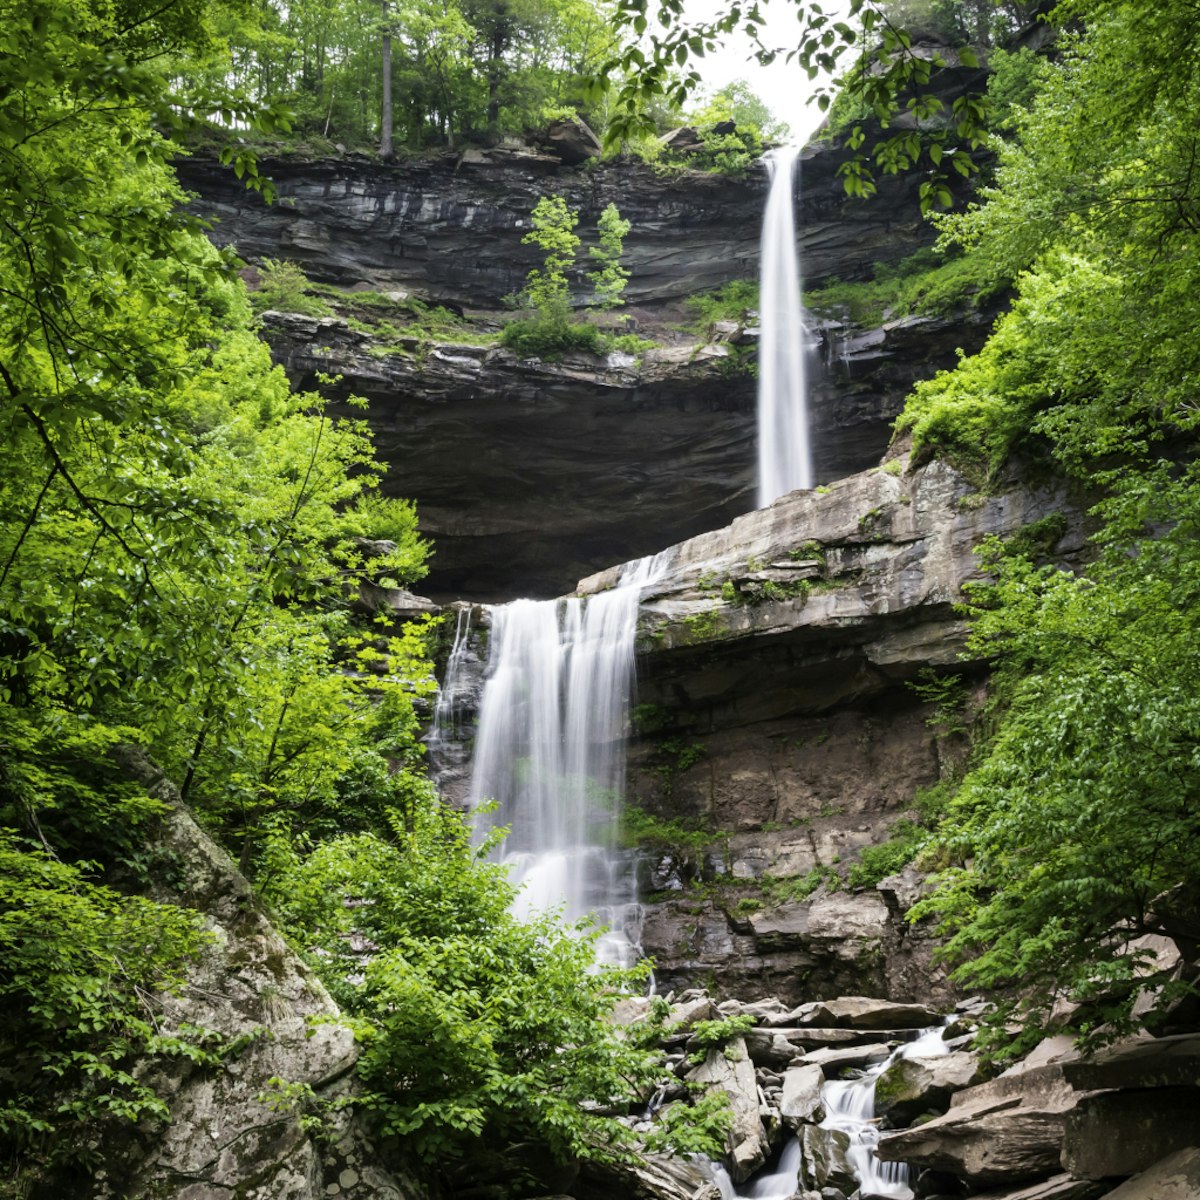 Two-Tier Waterfall surrounded by such green trees in Summer. Kaaterskill Falls taken in the Catskills, NY.